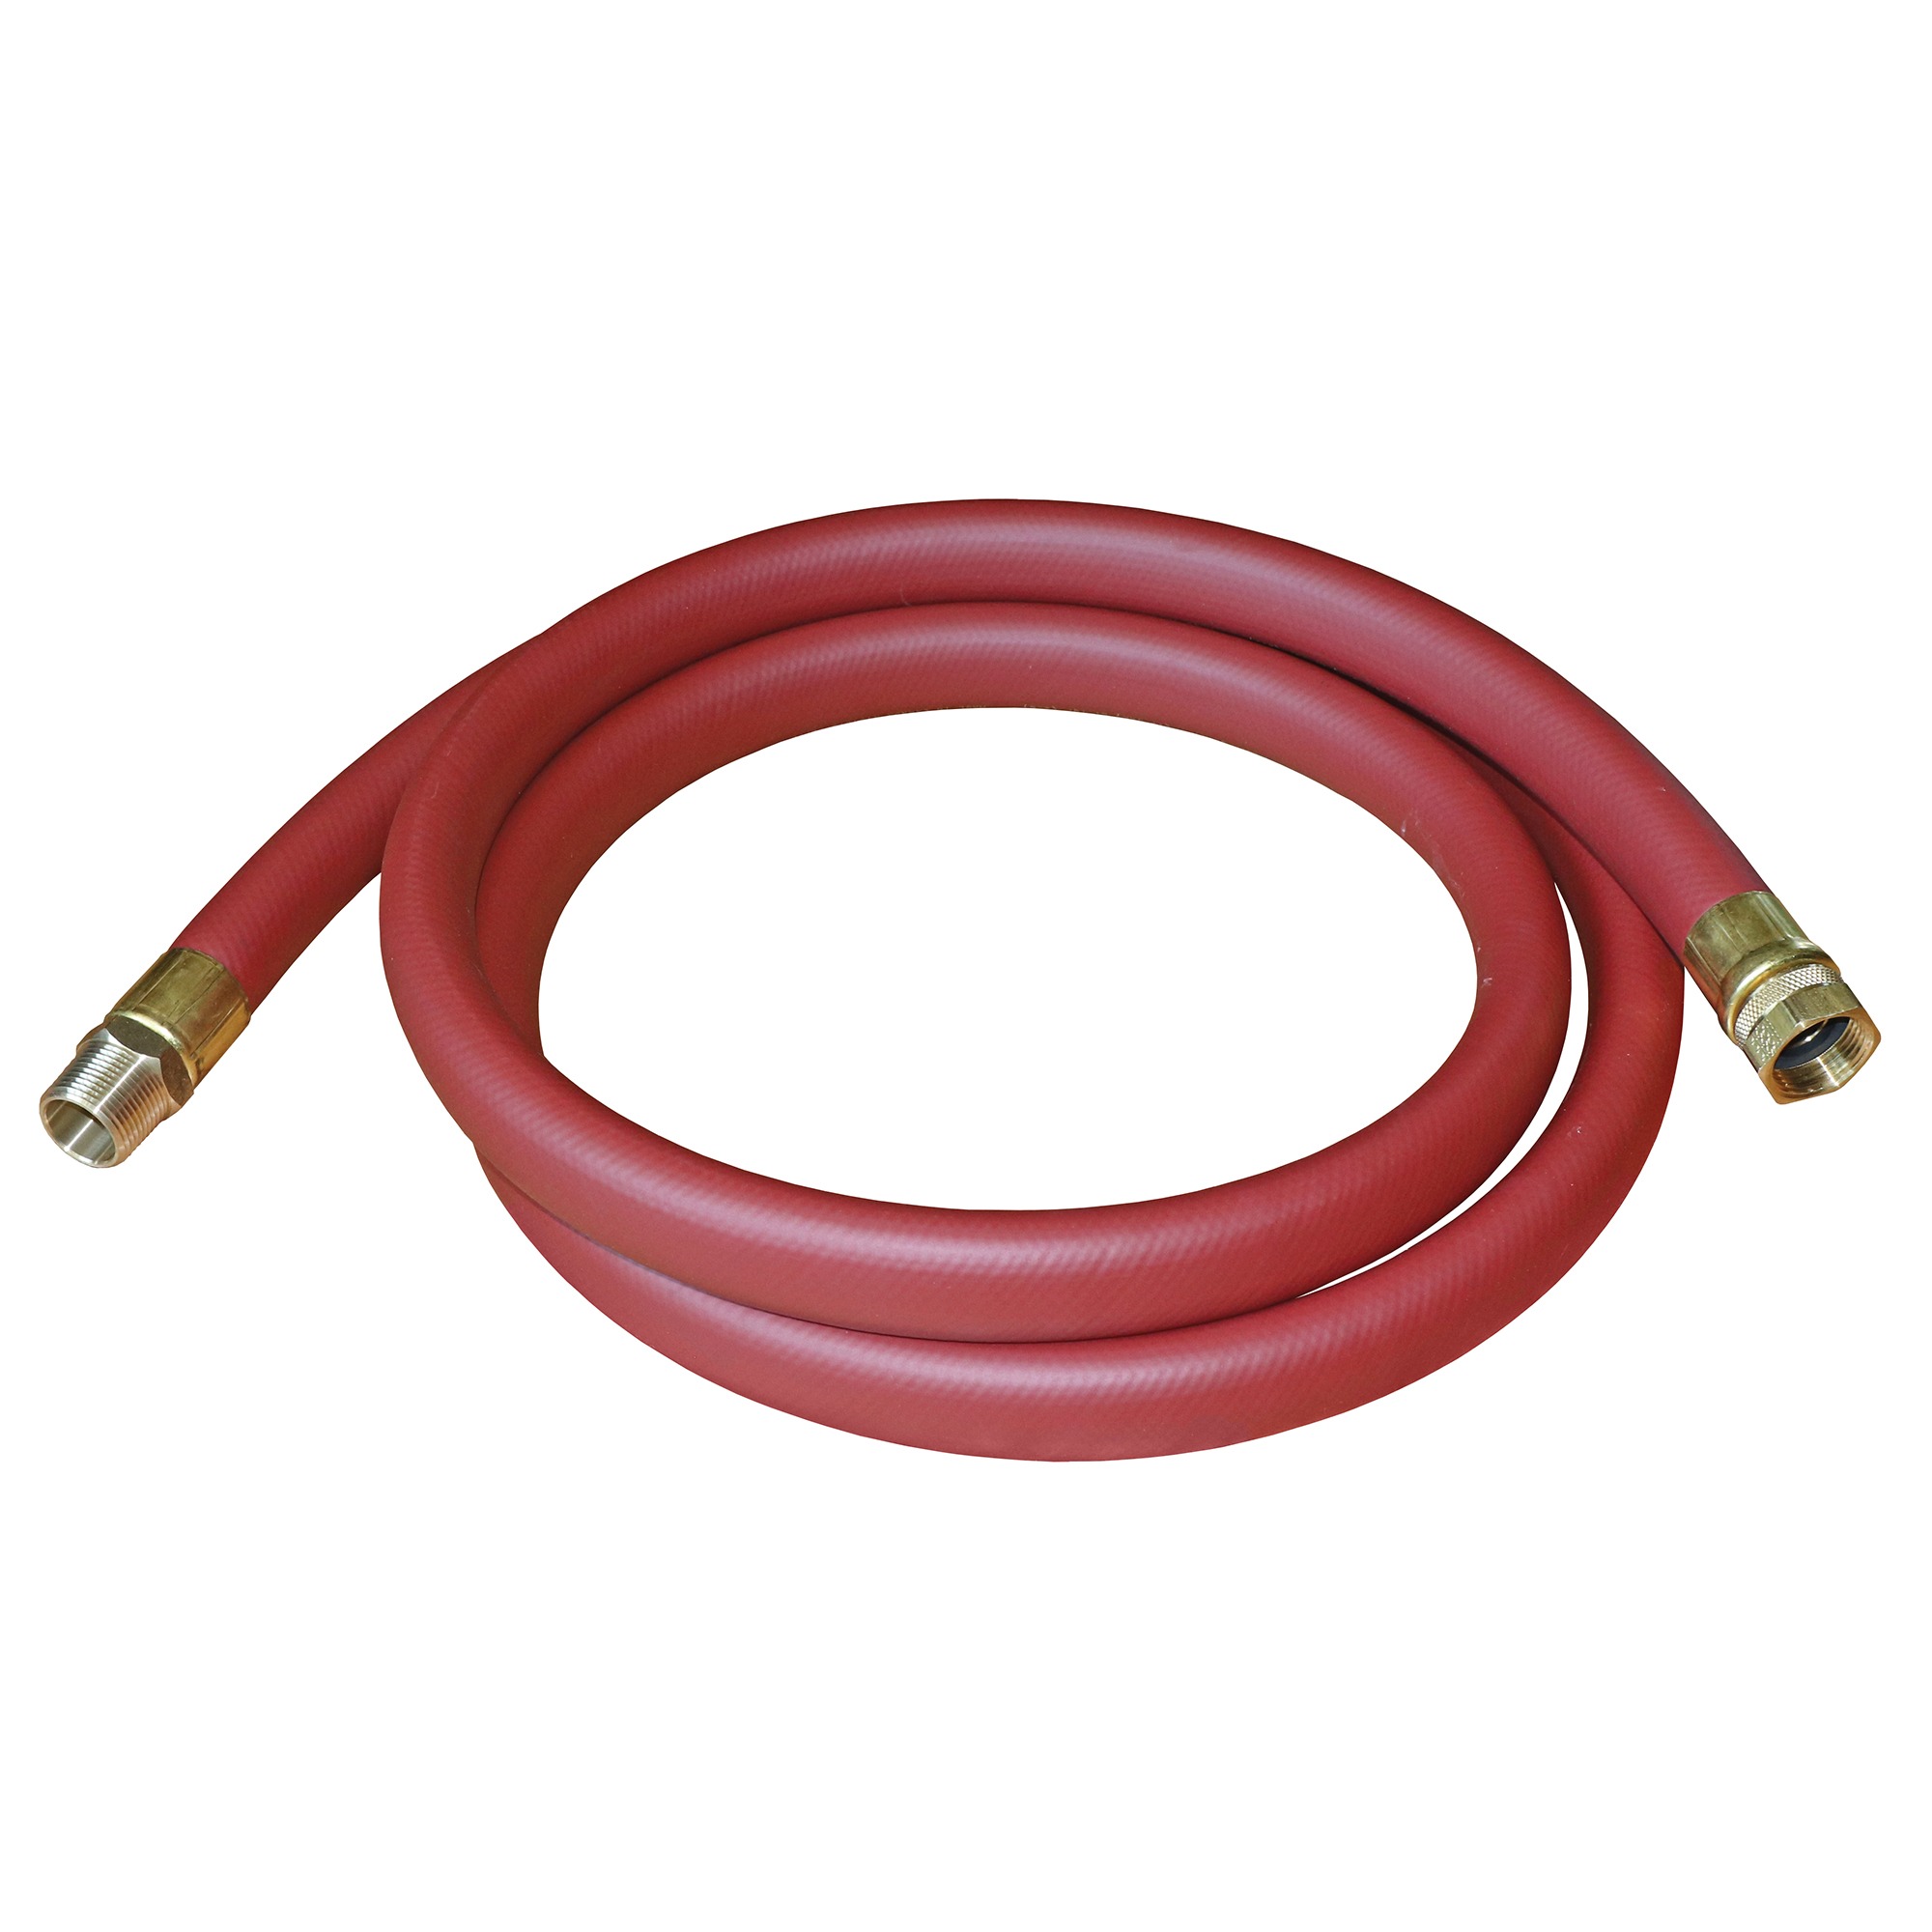 Reelcraft S600982-10 - 1 in. x 10 ft. Air/Water Inlet Hose